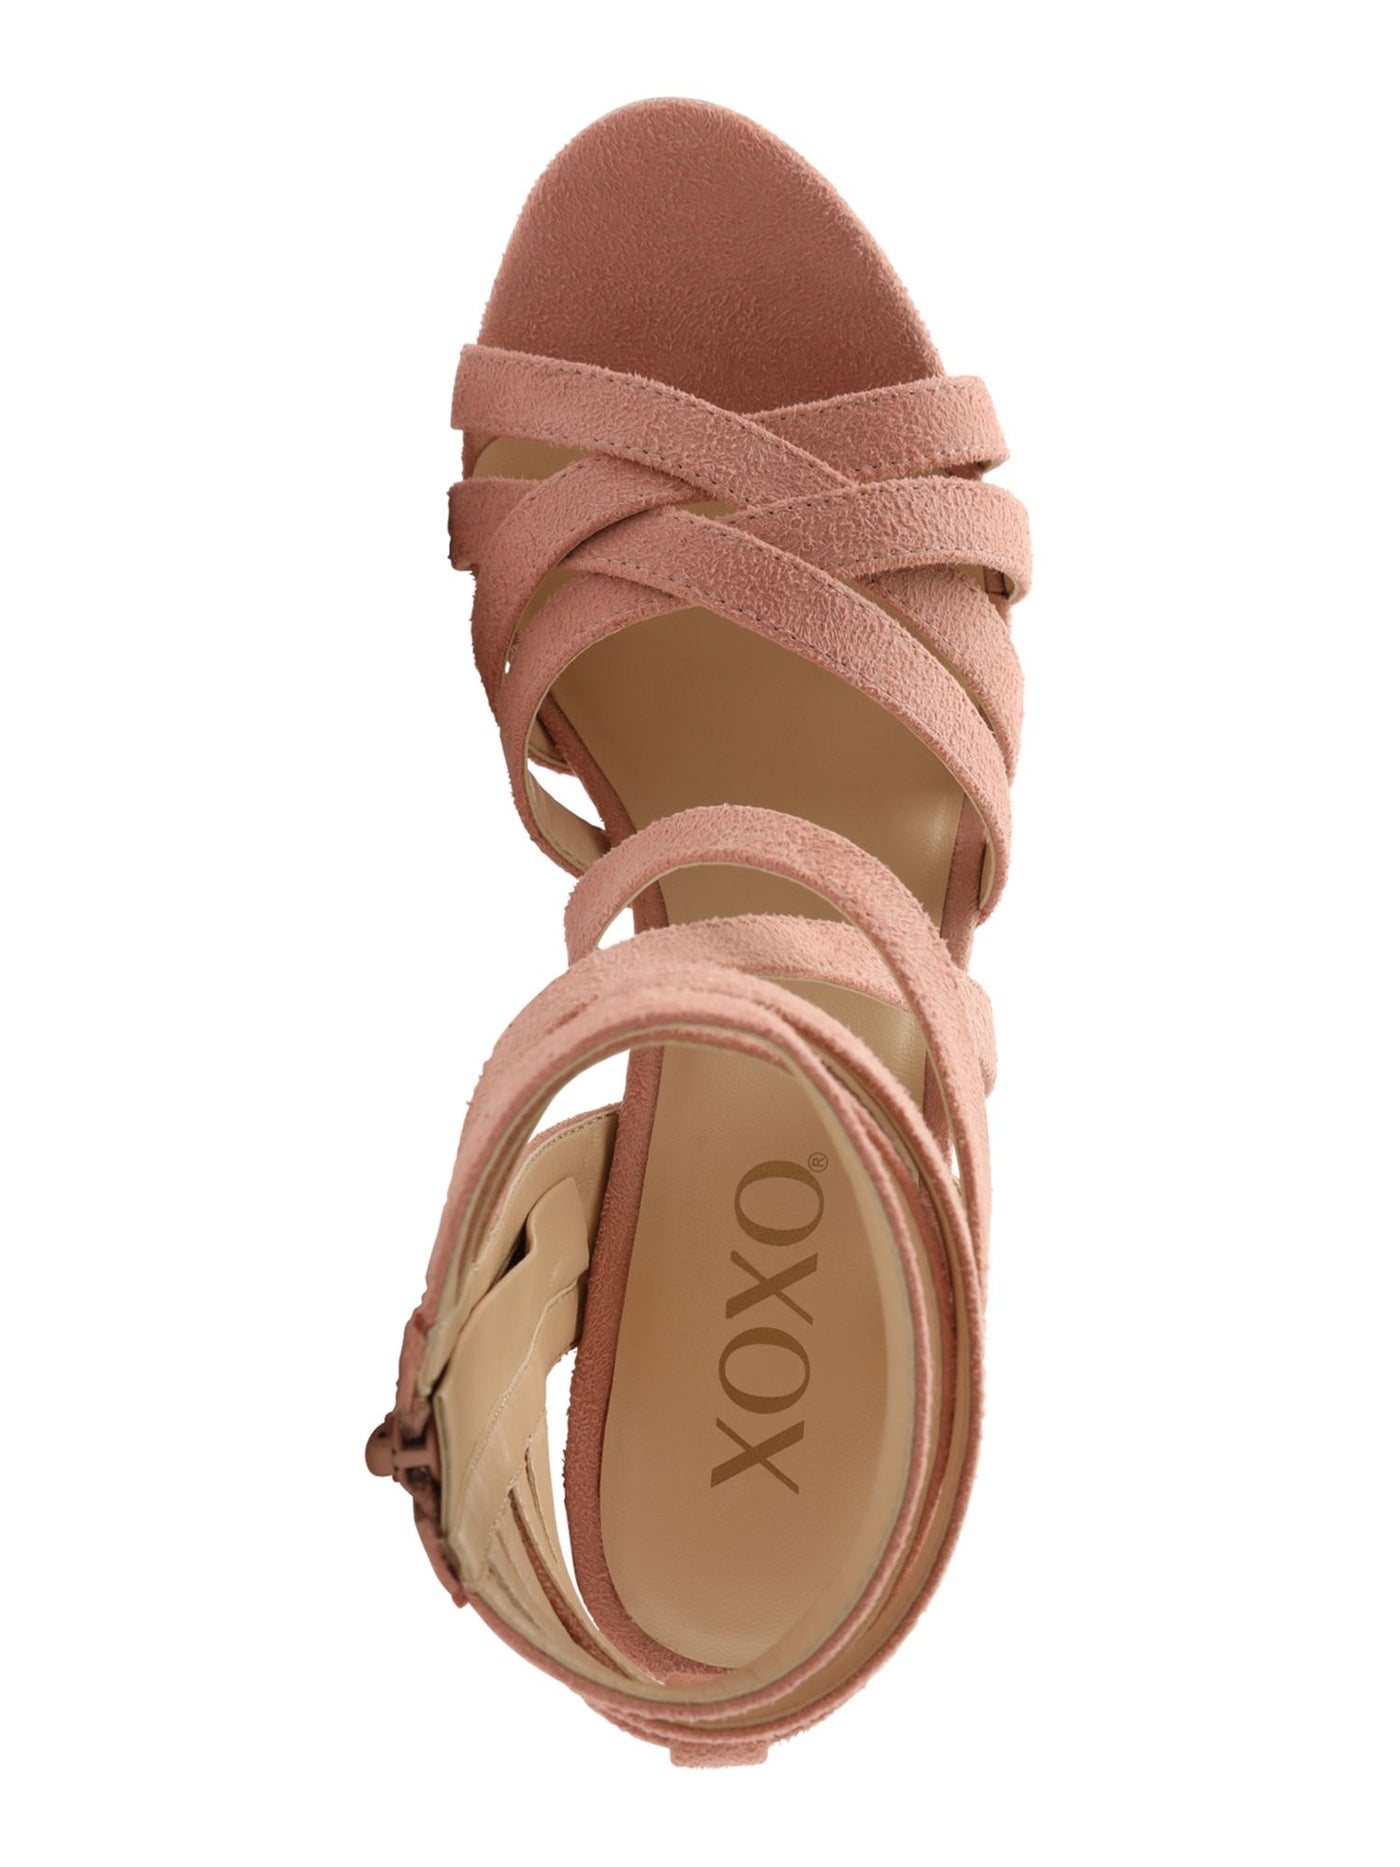 XOXO Womens Salmon Pink Strappy Padded Eden Round Toe Block Heel Zip-Up Dress Sandals Shoes 9 M